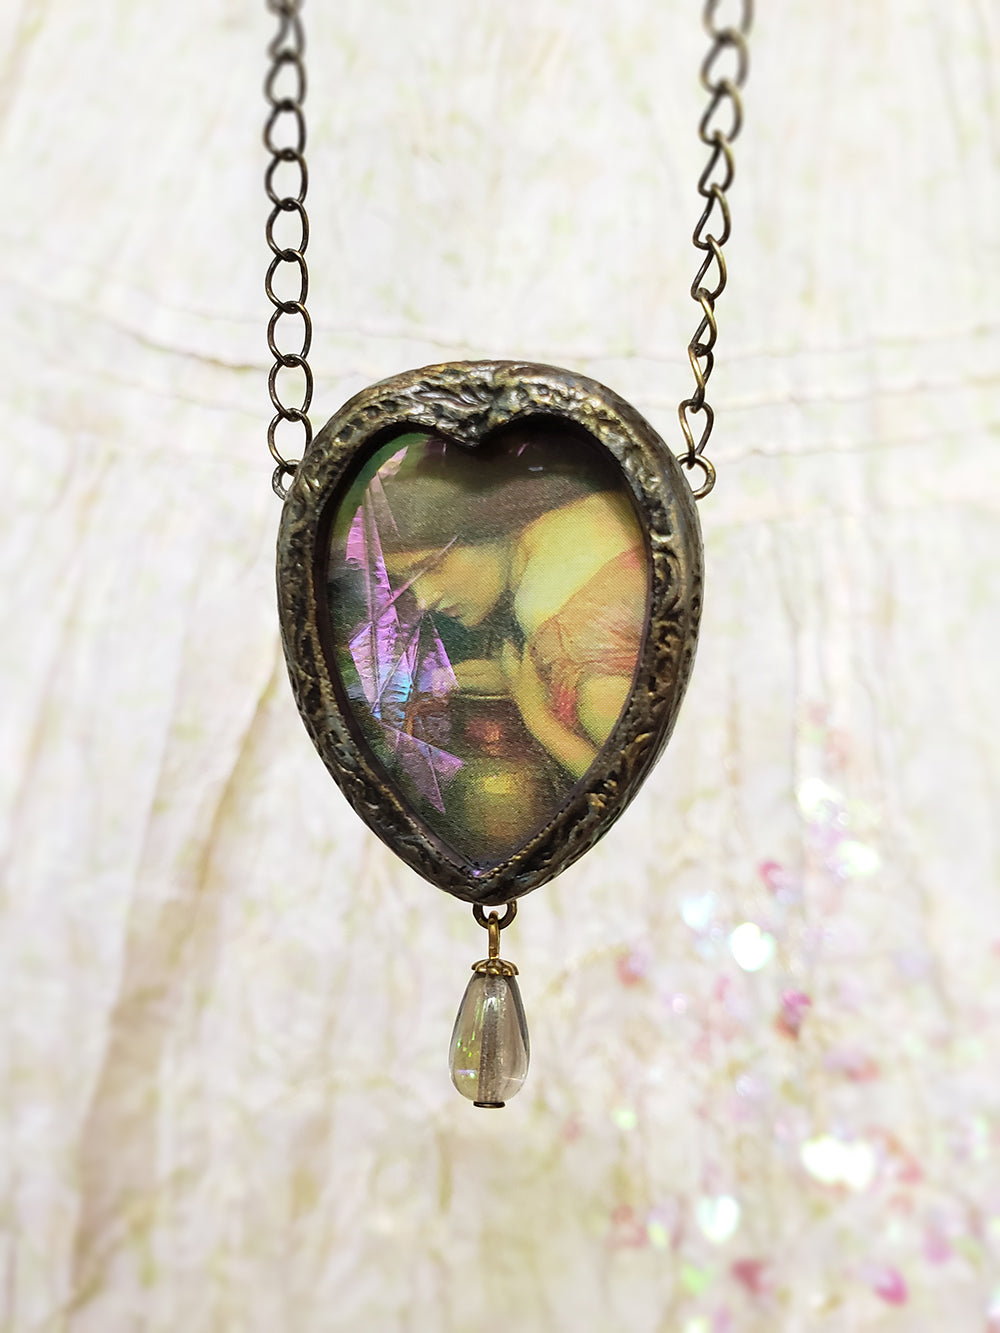 Waterhouse Nymph ~ Iridescent Stained Glass Heart Pictotrial Shrine Amulet